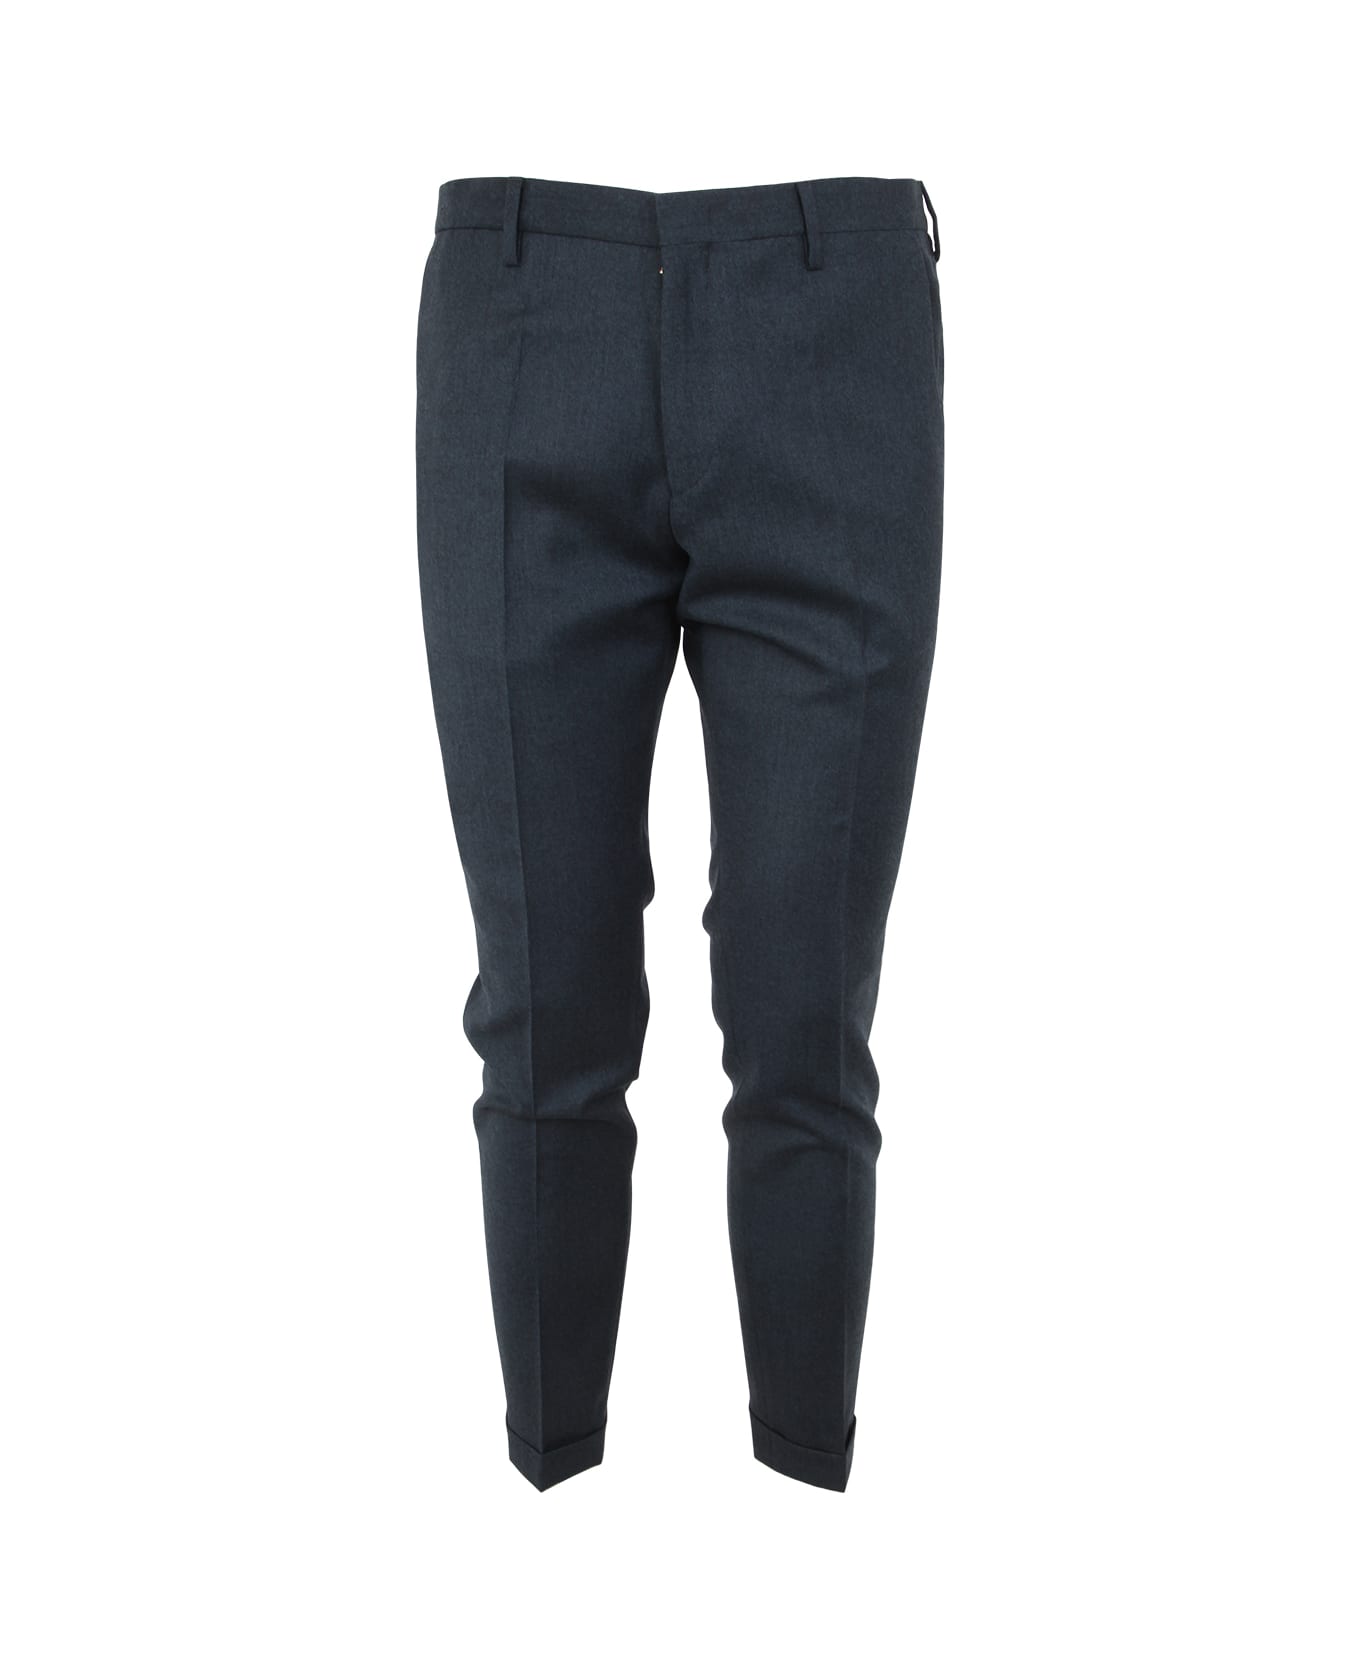 Paul Smith Gents Trousers - A Petrol Blue